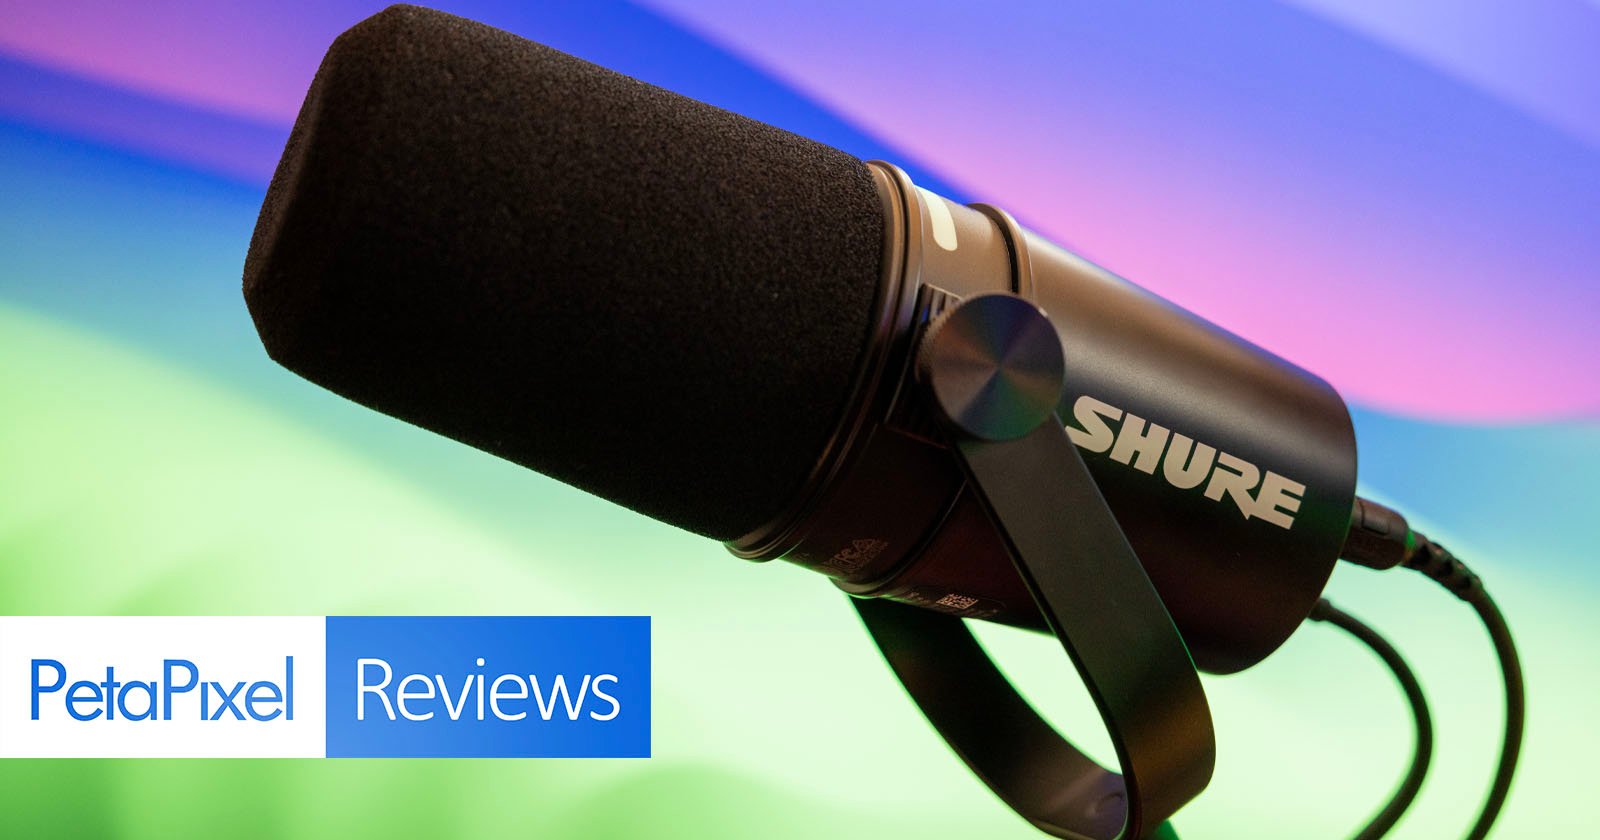 A close-up image of a black shure microphone with its brand logo visible, positioned against a colorful blurred background, with the text "petapixel reviews" overlaying the bottom corner.